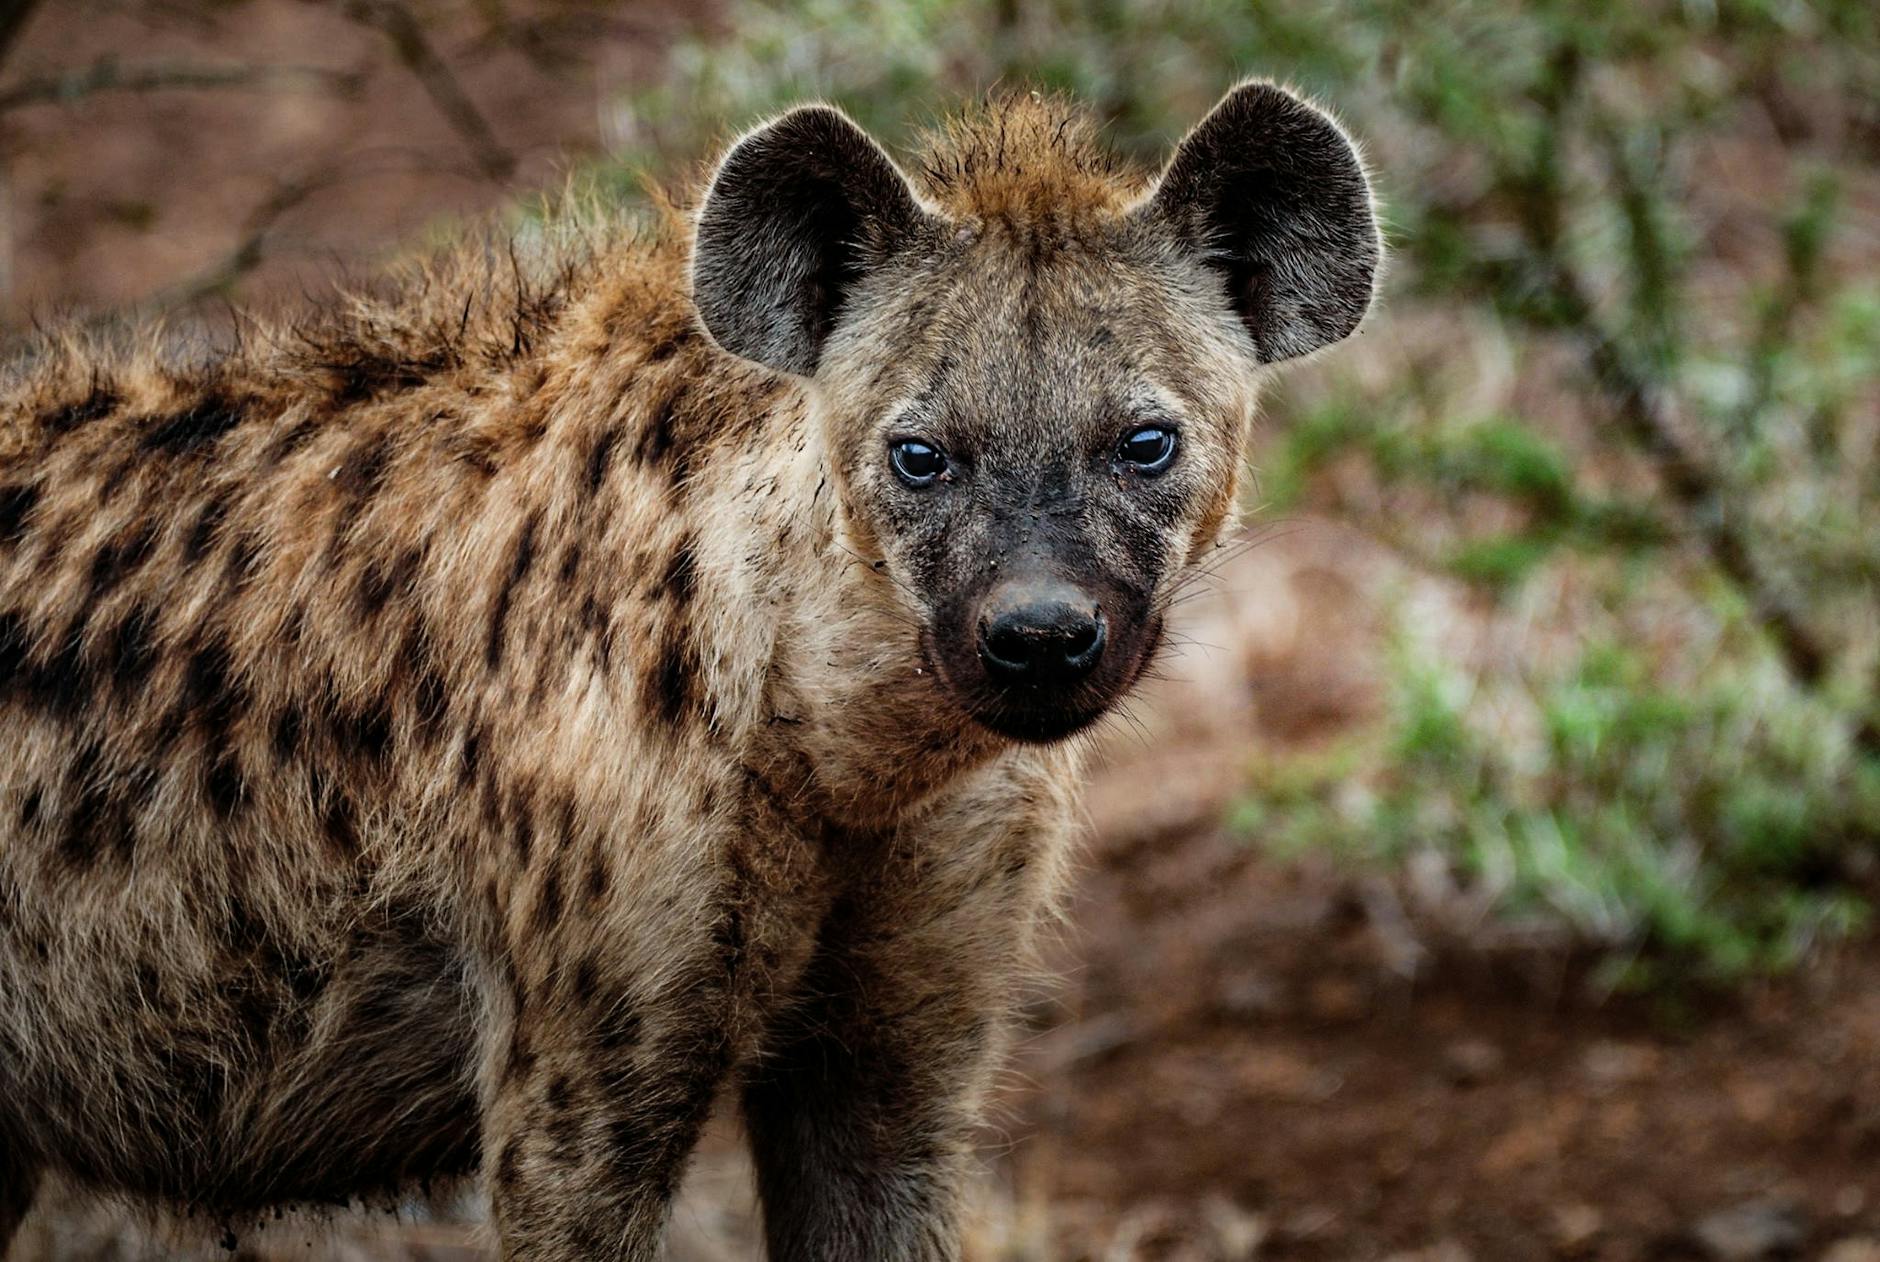 Meet the Spotted Hyena